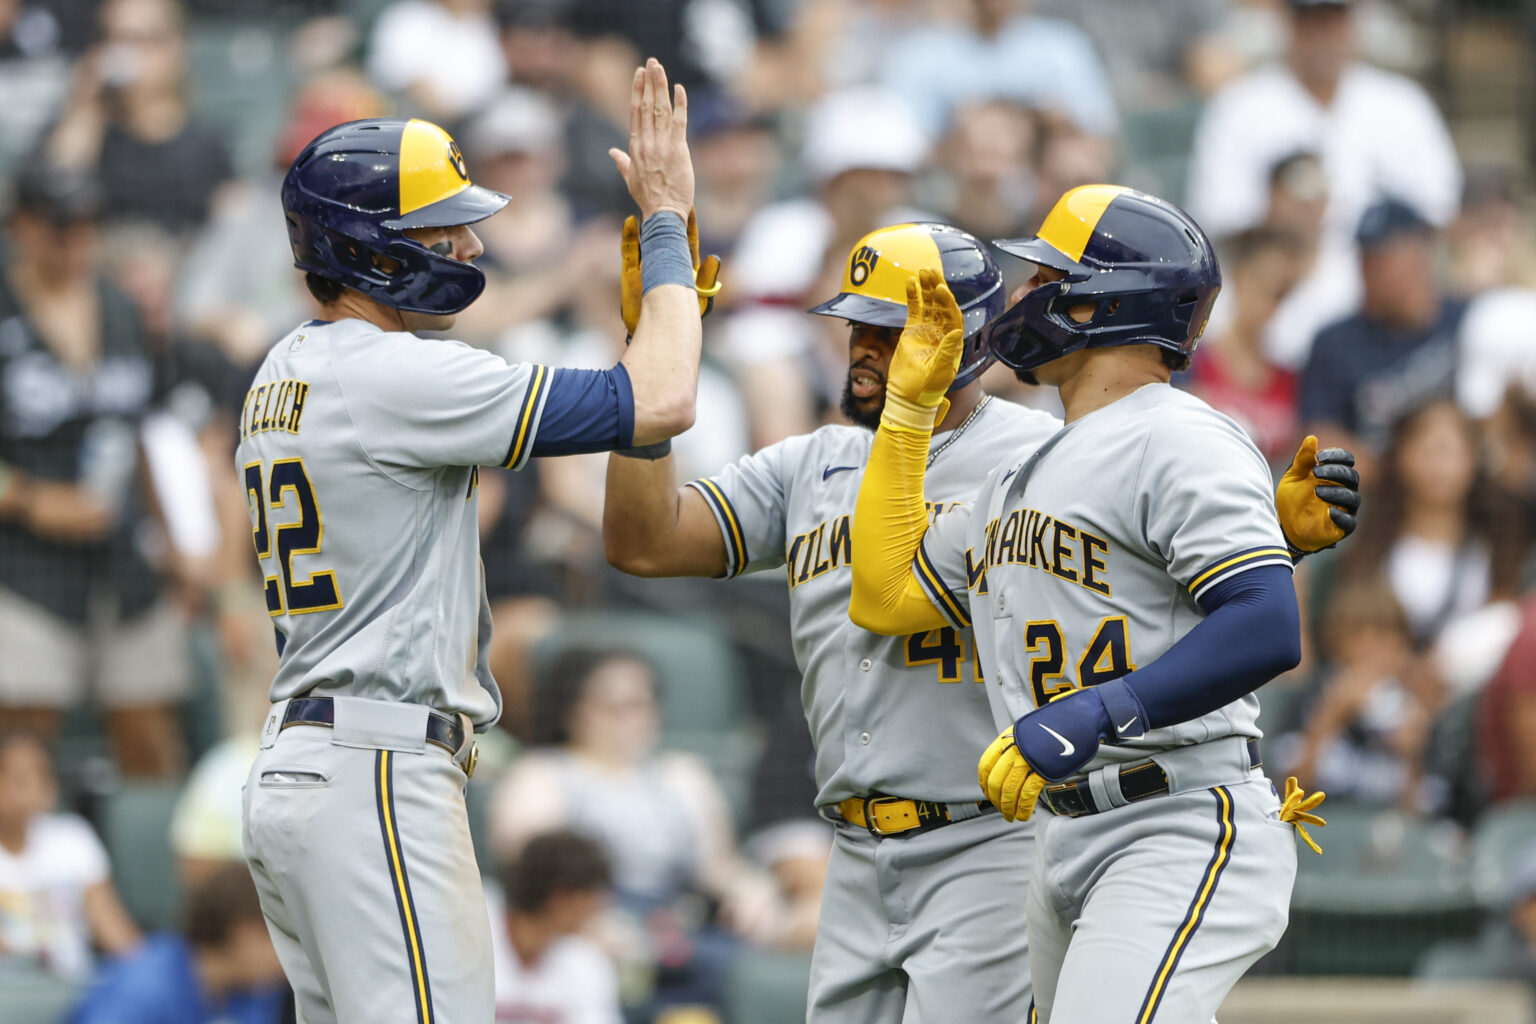 William Contreras caps 3-run 7th with winning RBI in Brewers' 3-2 victory  over White Sox